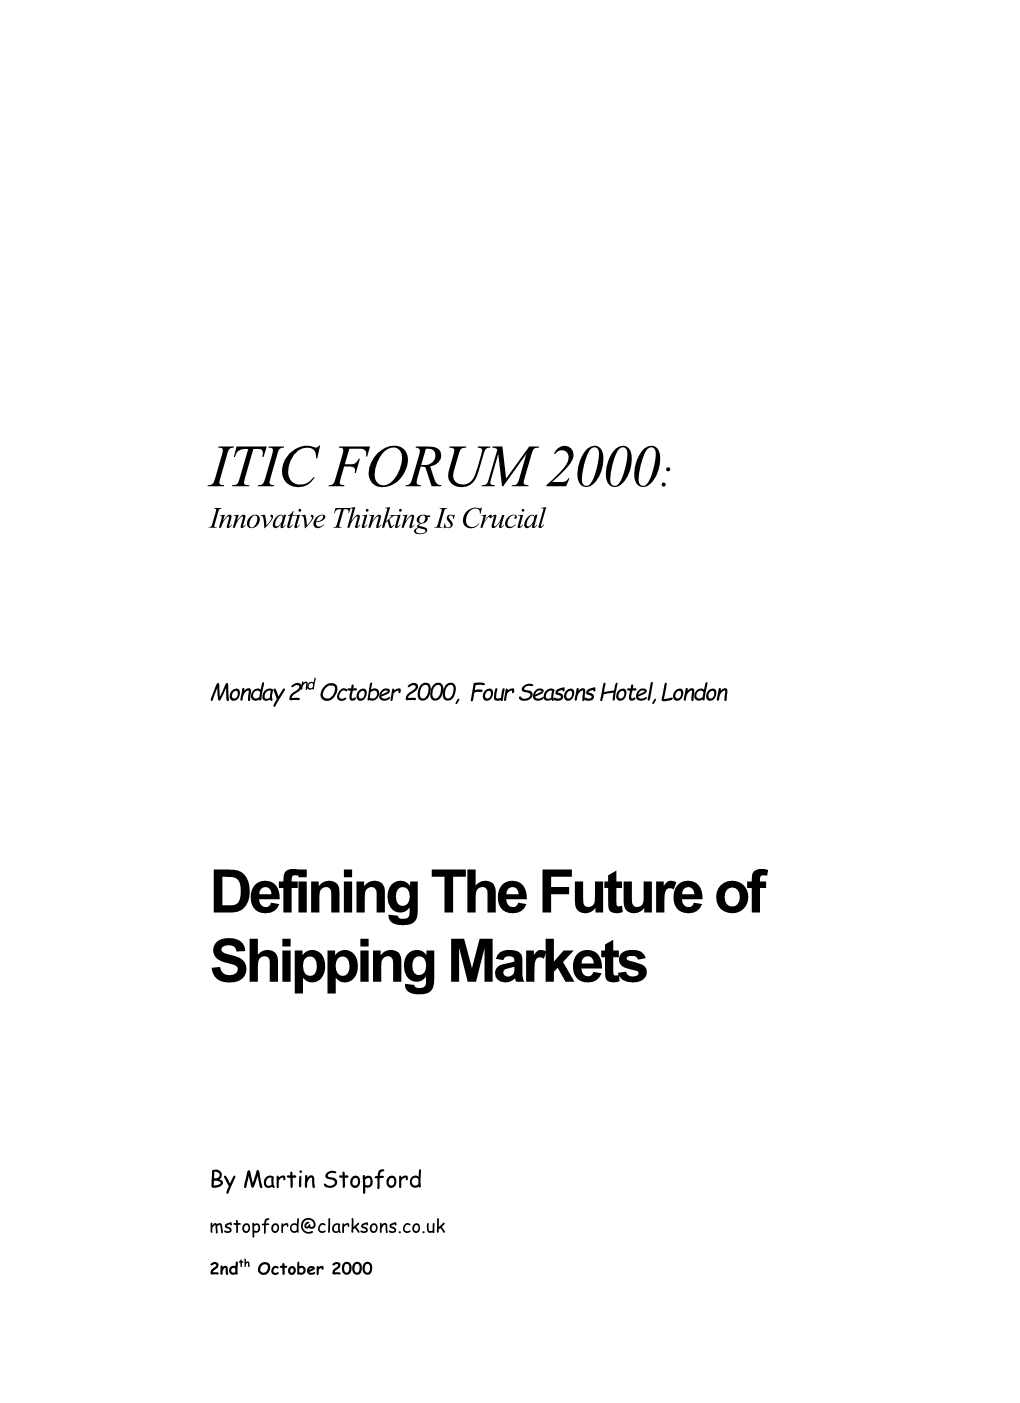 ITIC FORUM 2000: Defining the Future of Shipping Markets